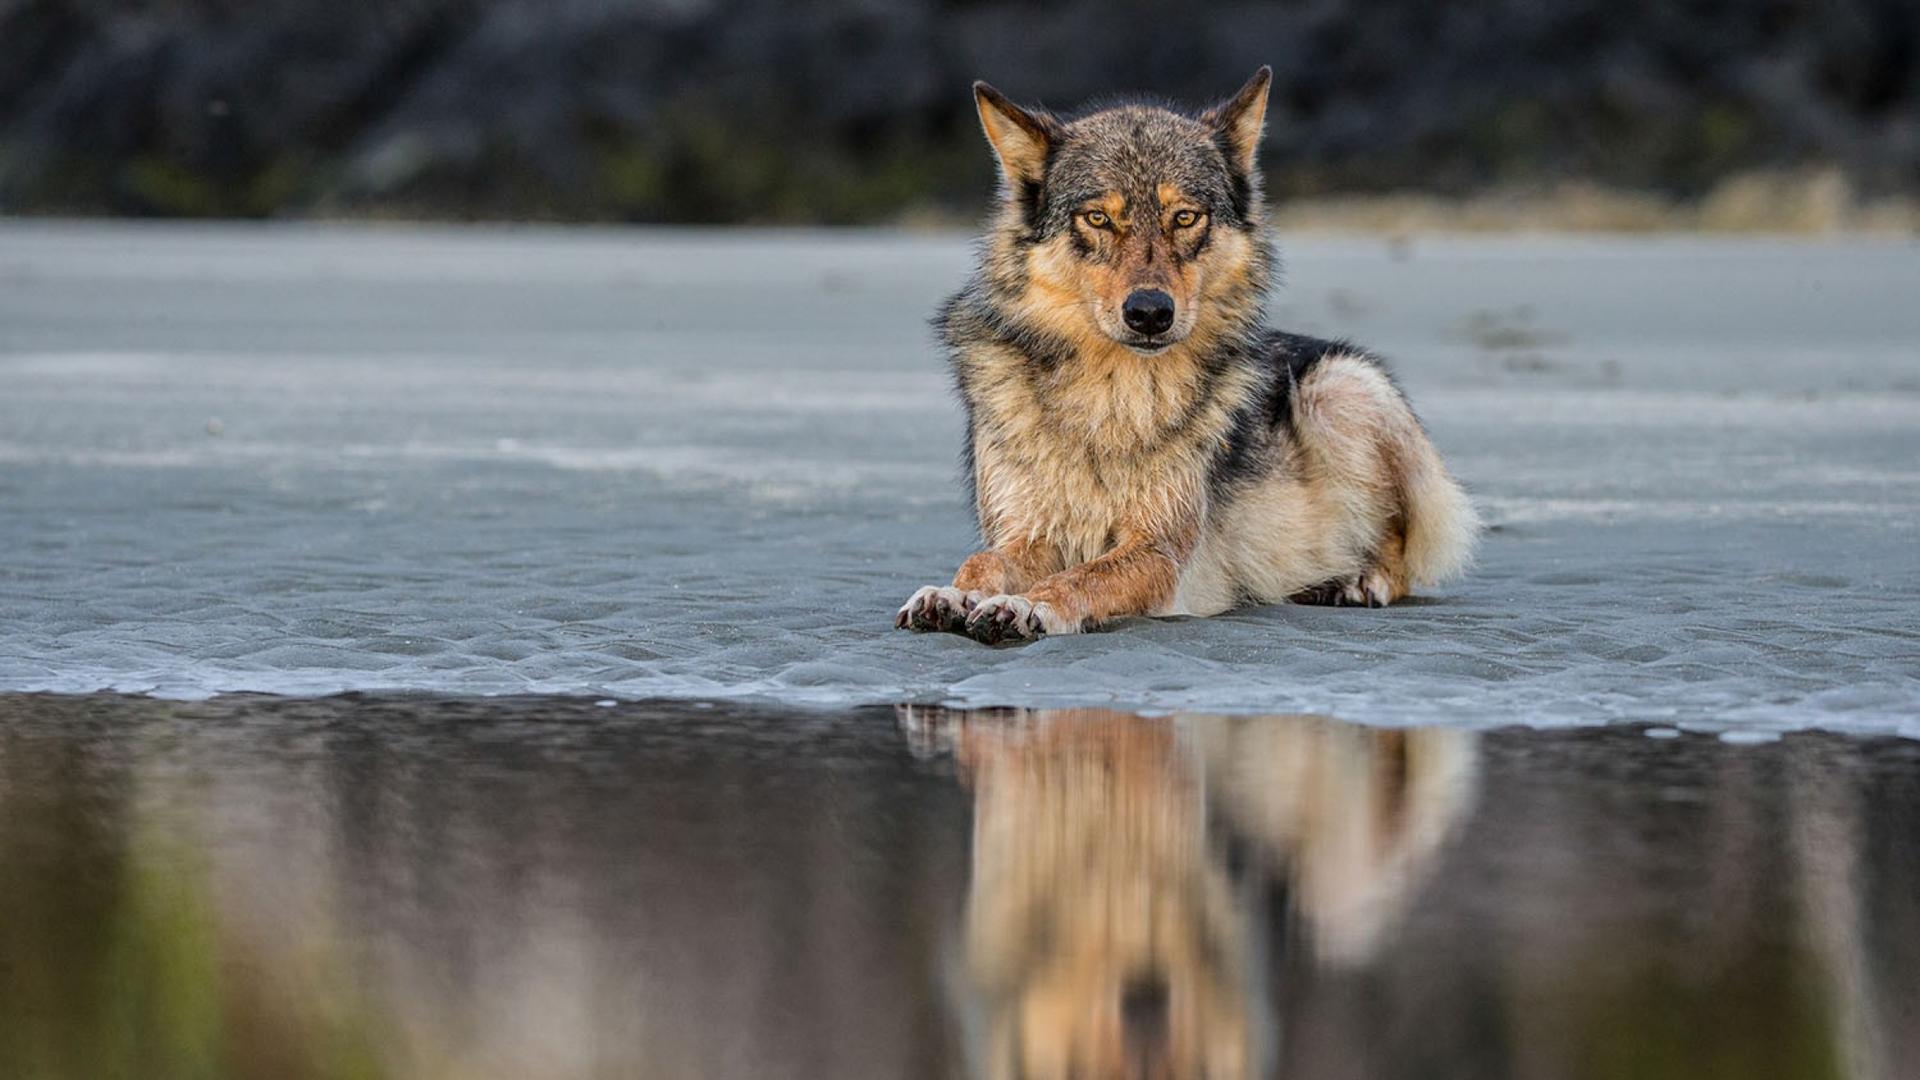 Sightings of the elusive coastal wolves are usually rare, with many visitors only finding foot prints or hearing calls but not actually spotting the animals. 